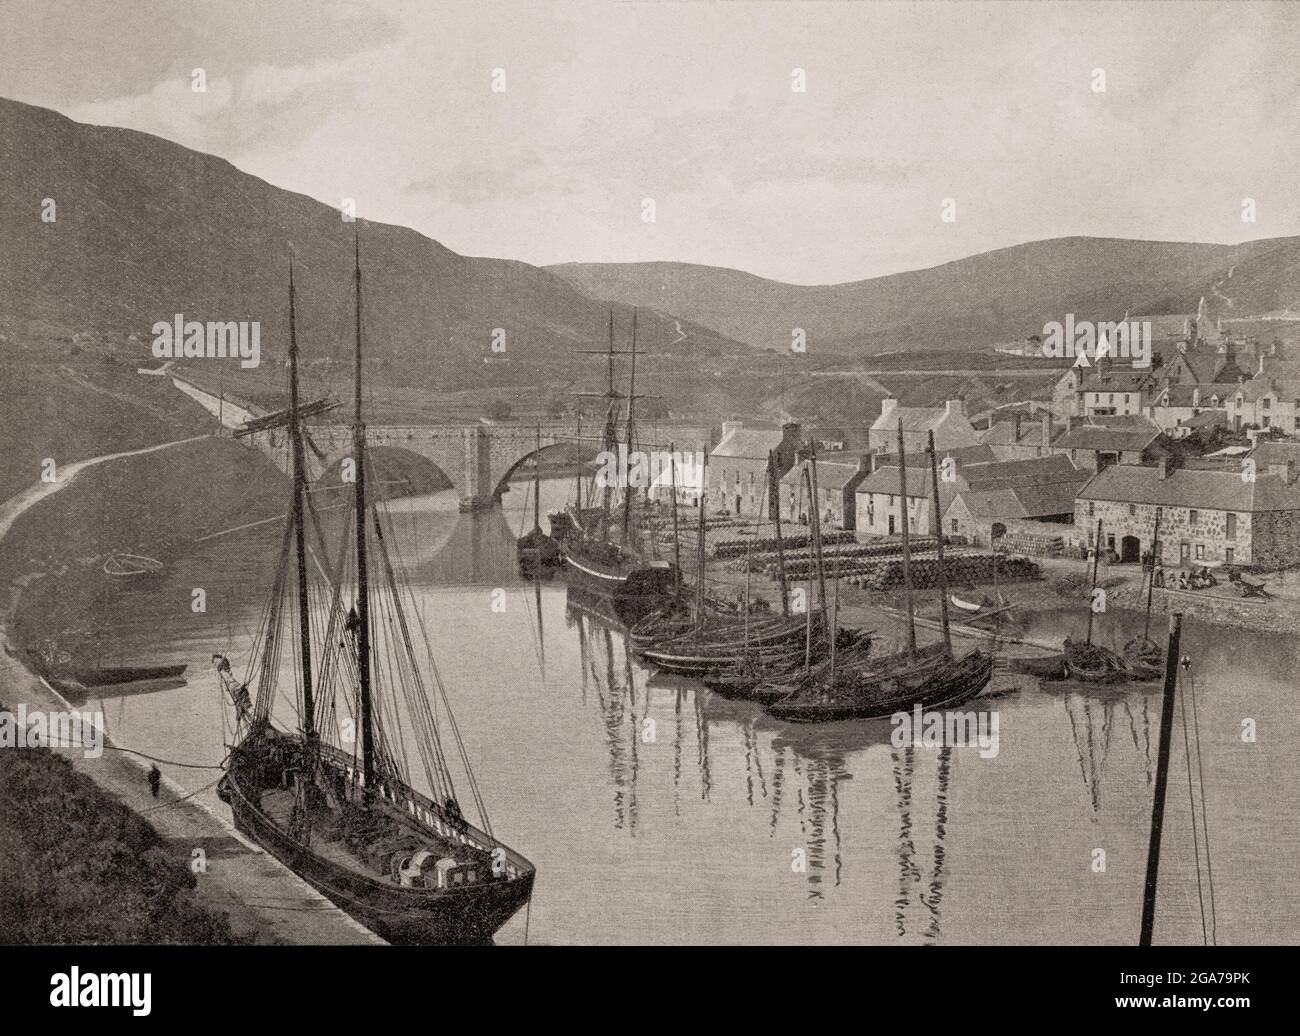 A late 19th century view of Helmsdale, a village on the banks of the River Helmsdale on the east coast of Sutherland, in the Highland council area of Scotland. The modern village was planned in 1814 to resettle communities that had been removed from the surrounding straths as part of the Highland Clearances. In 1869, two tributaries of the river were the scene of a gold rush when Robert Nelson Gilchrist, a native of Kildonan, who had spent 17 years in the goldfields of Australia was given permission by the Duke of Sutherland to pan the gravels of the Helmsdale River and burns and tributaries. Stock Photo